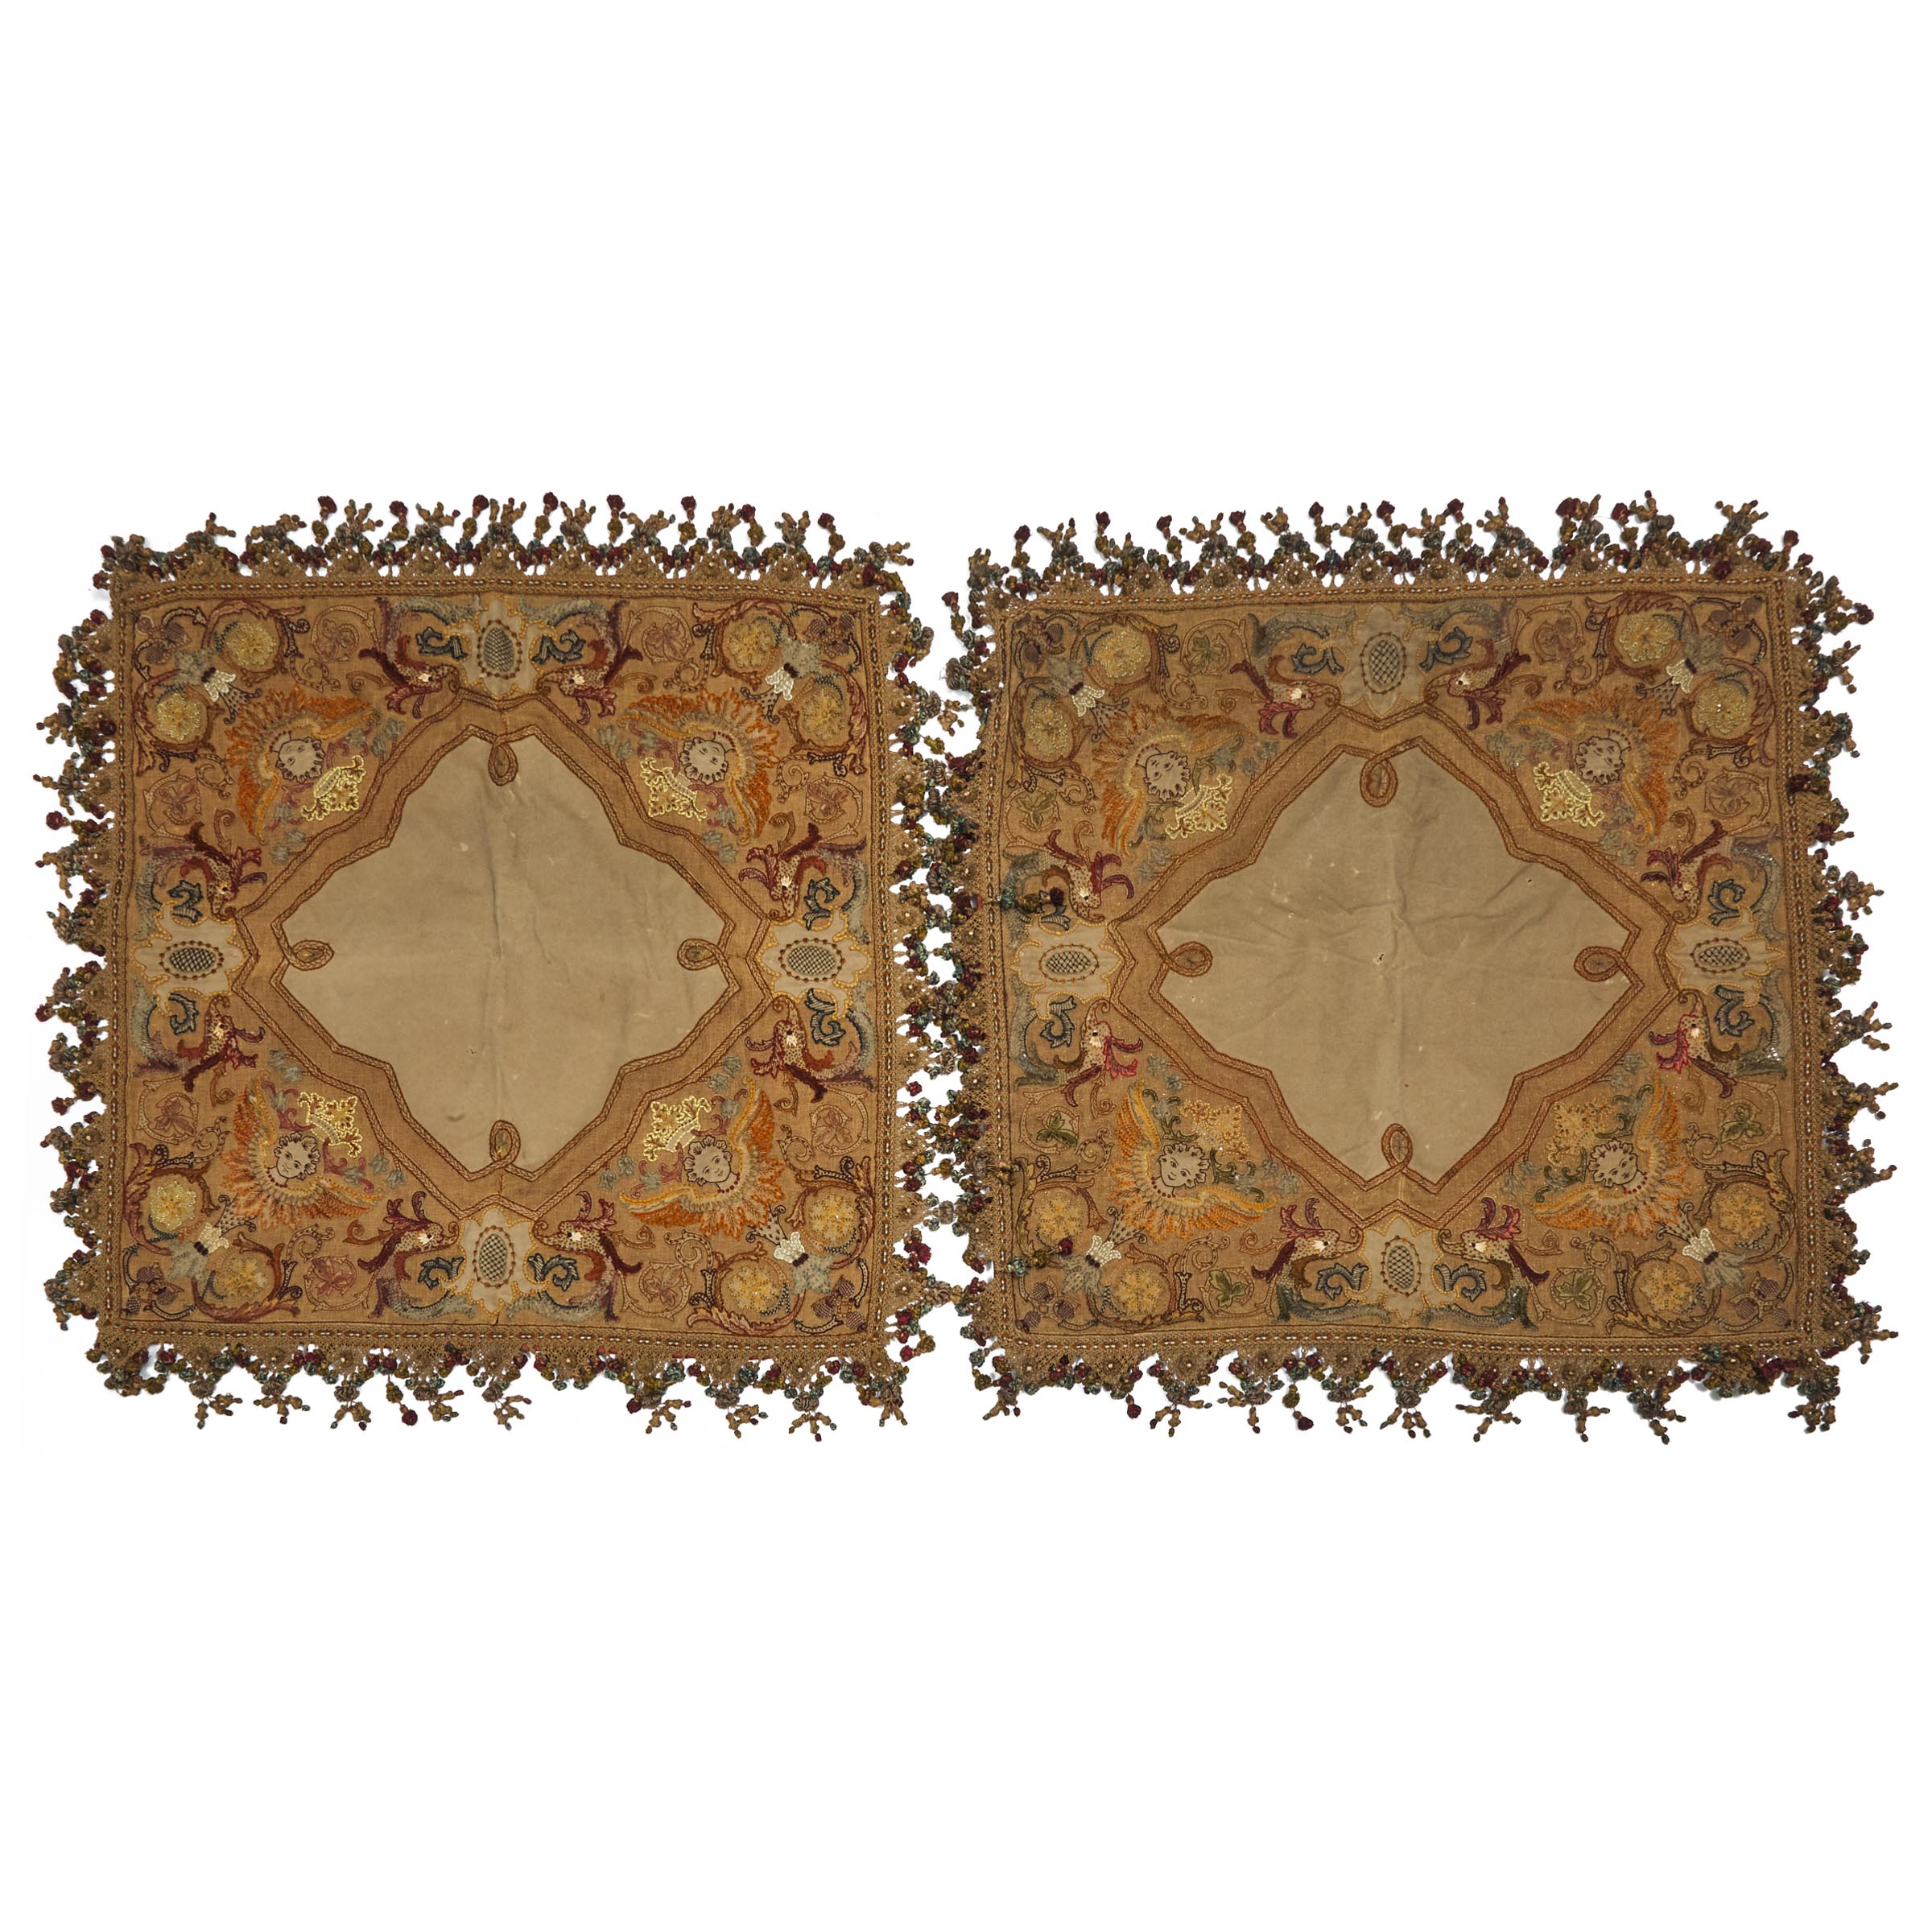 Pair of Victorian Table Cloths, 19th/early 20th century